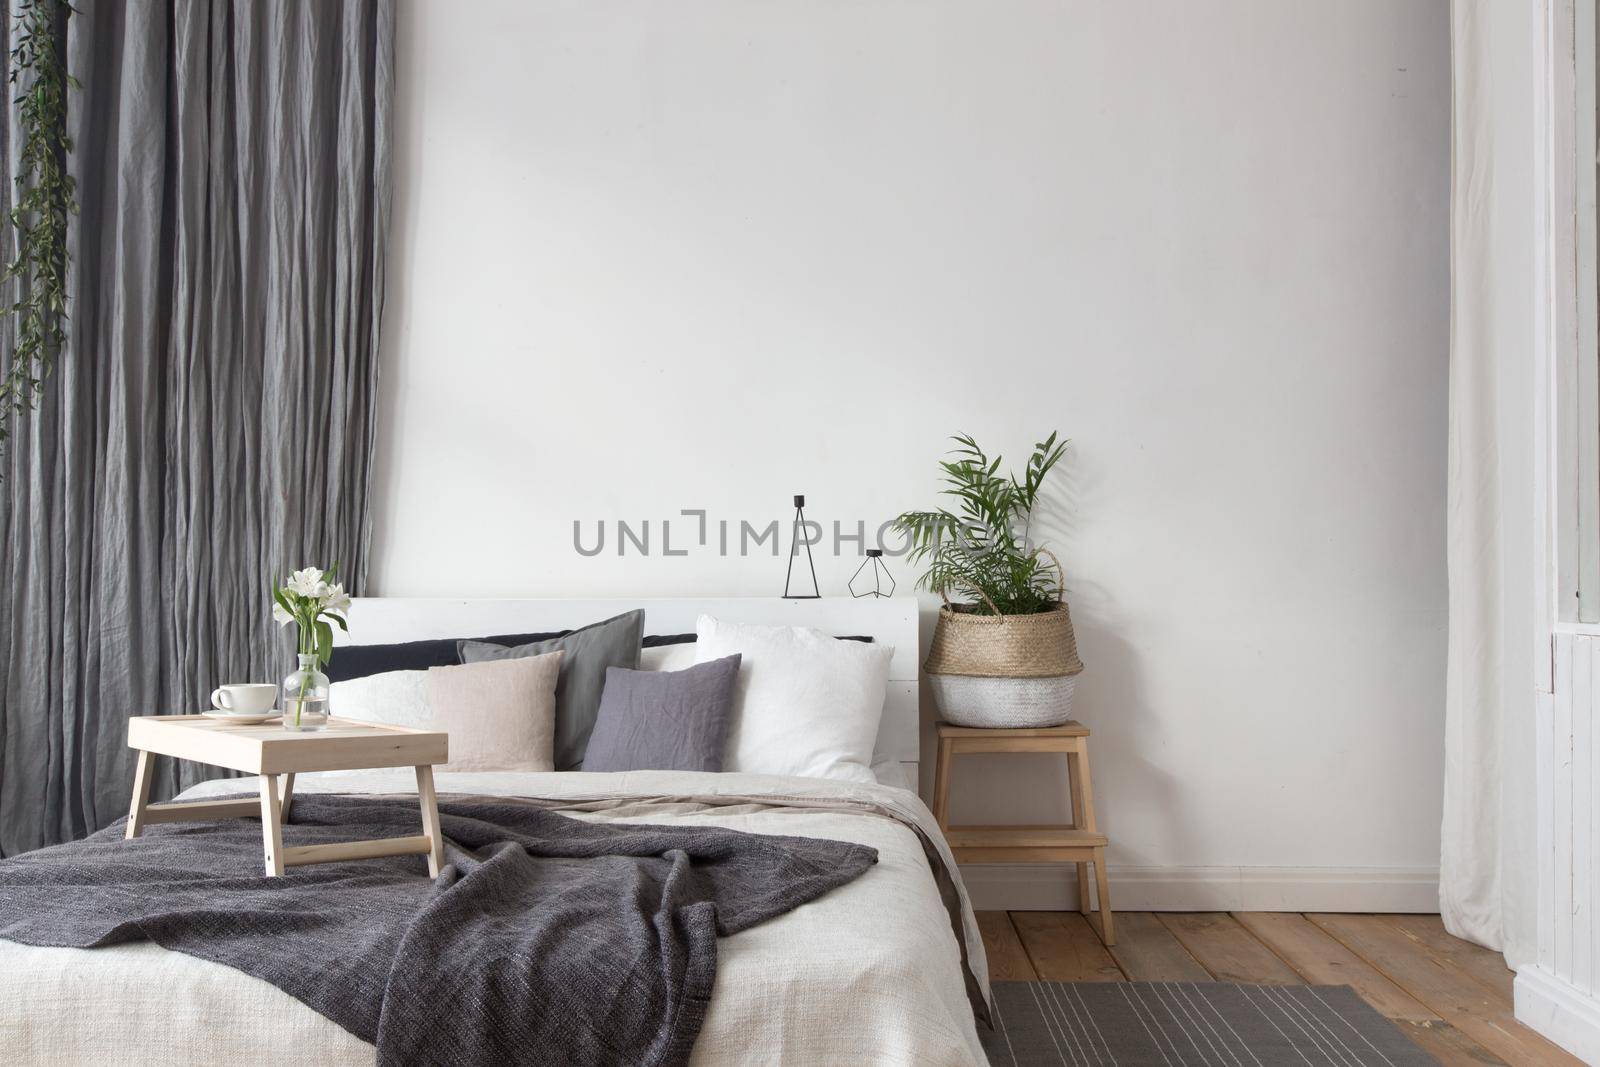 Interior of white and gray cozy bedroom with coffee on a tray